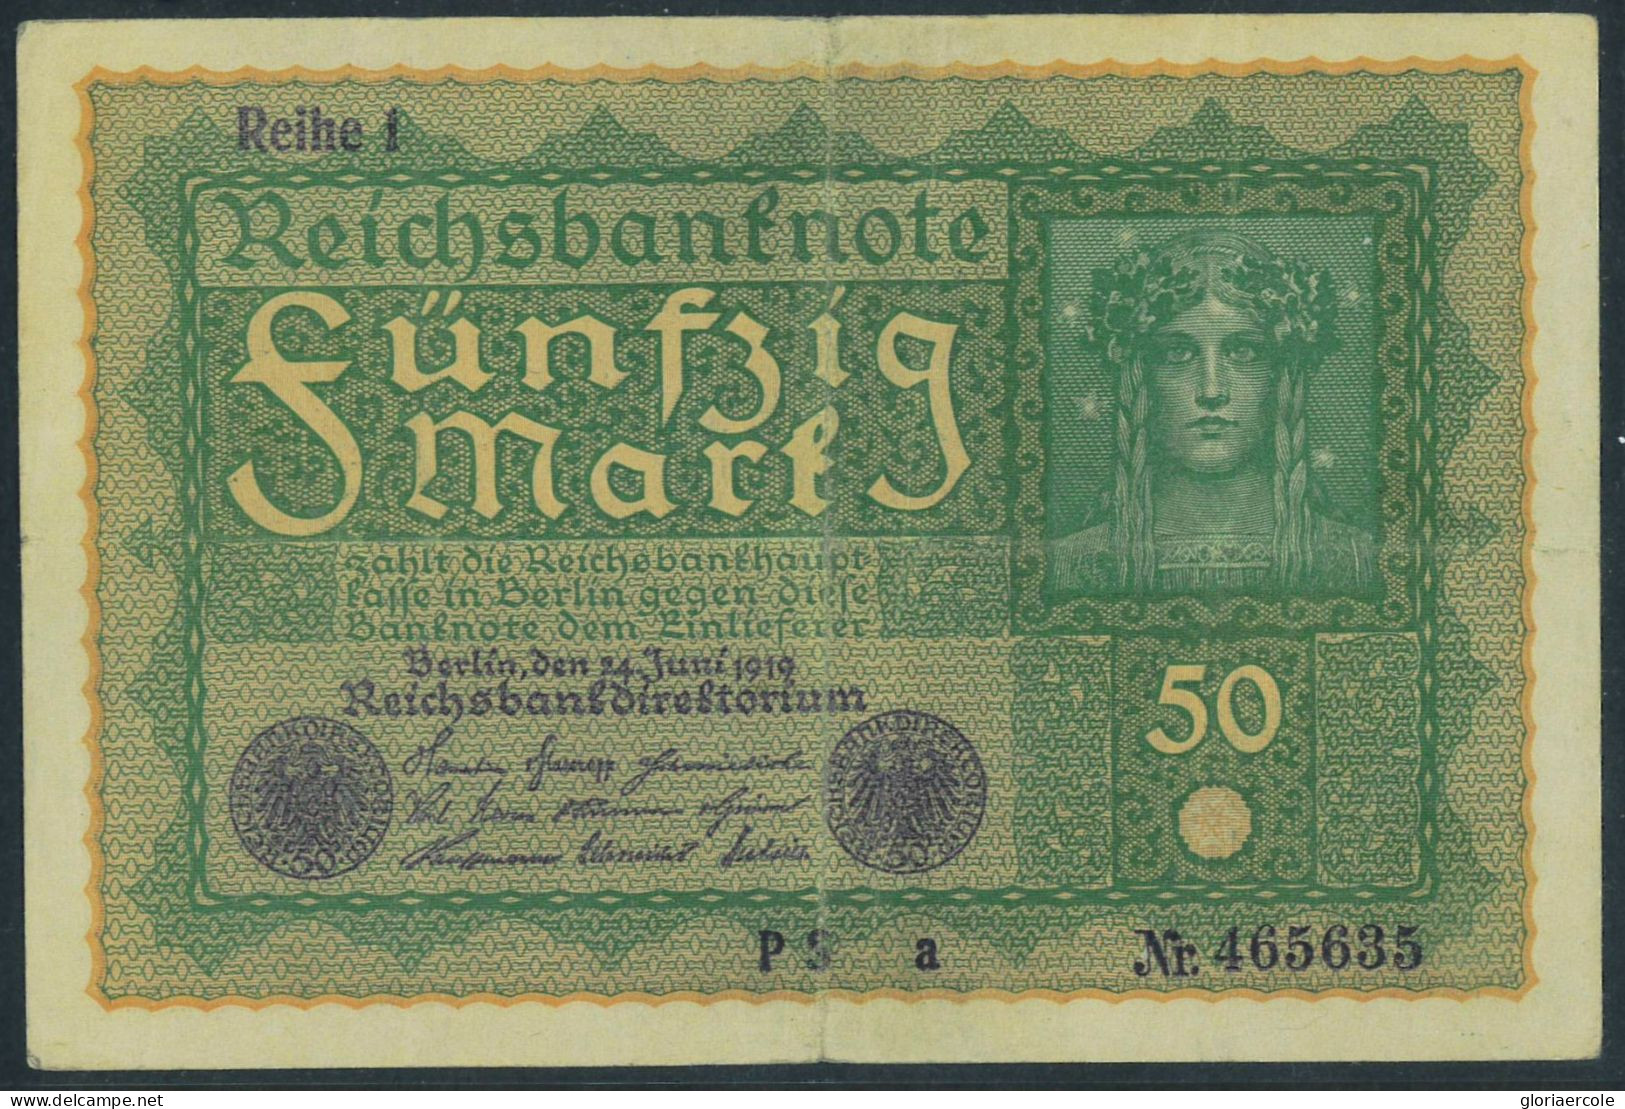 P2756 - GERMANY PAPER MONEY CAT. 66 FINE/VERY FINE CONDITION - Unclassified